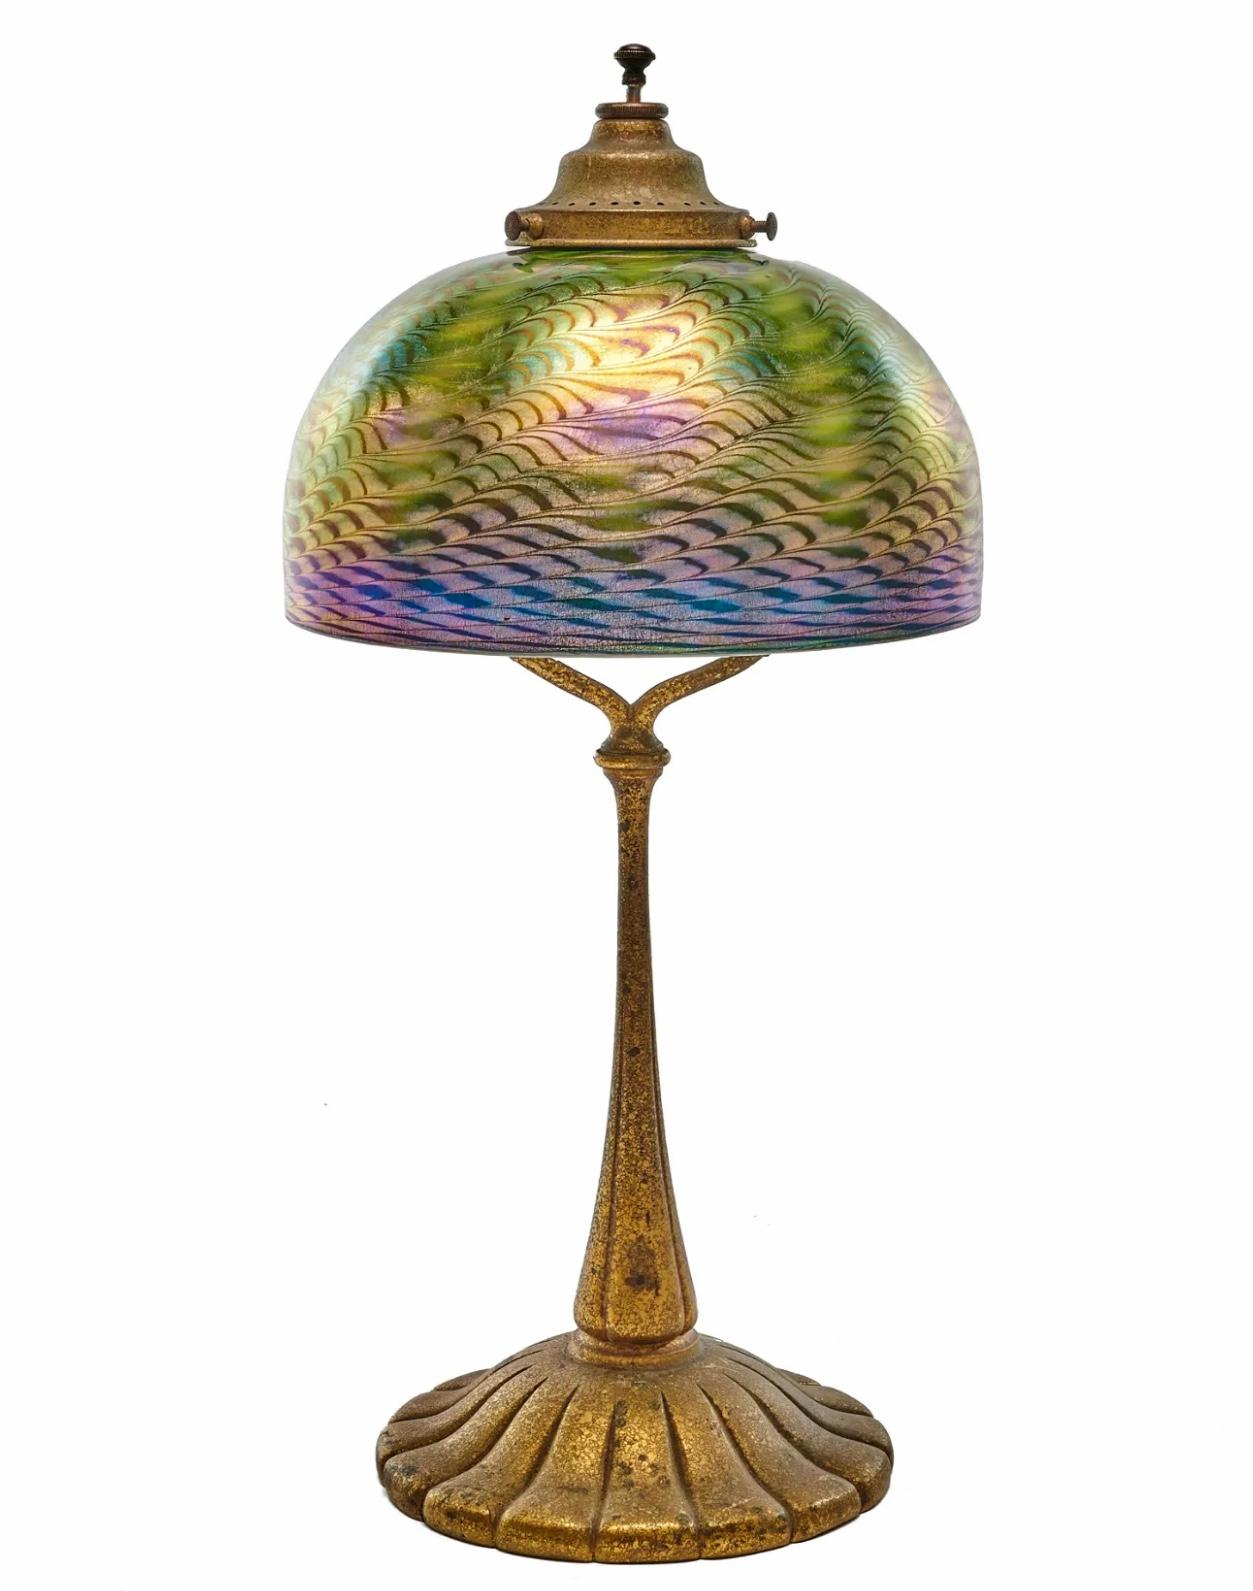 Tiffany Studios New York Table Lamp

This Damascene shade has exceptional blue and green iridescence and is in pristine condition. The textured and gilt base in wonderful original condition with a brilliant finial switch (Original)

New York,